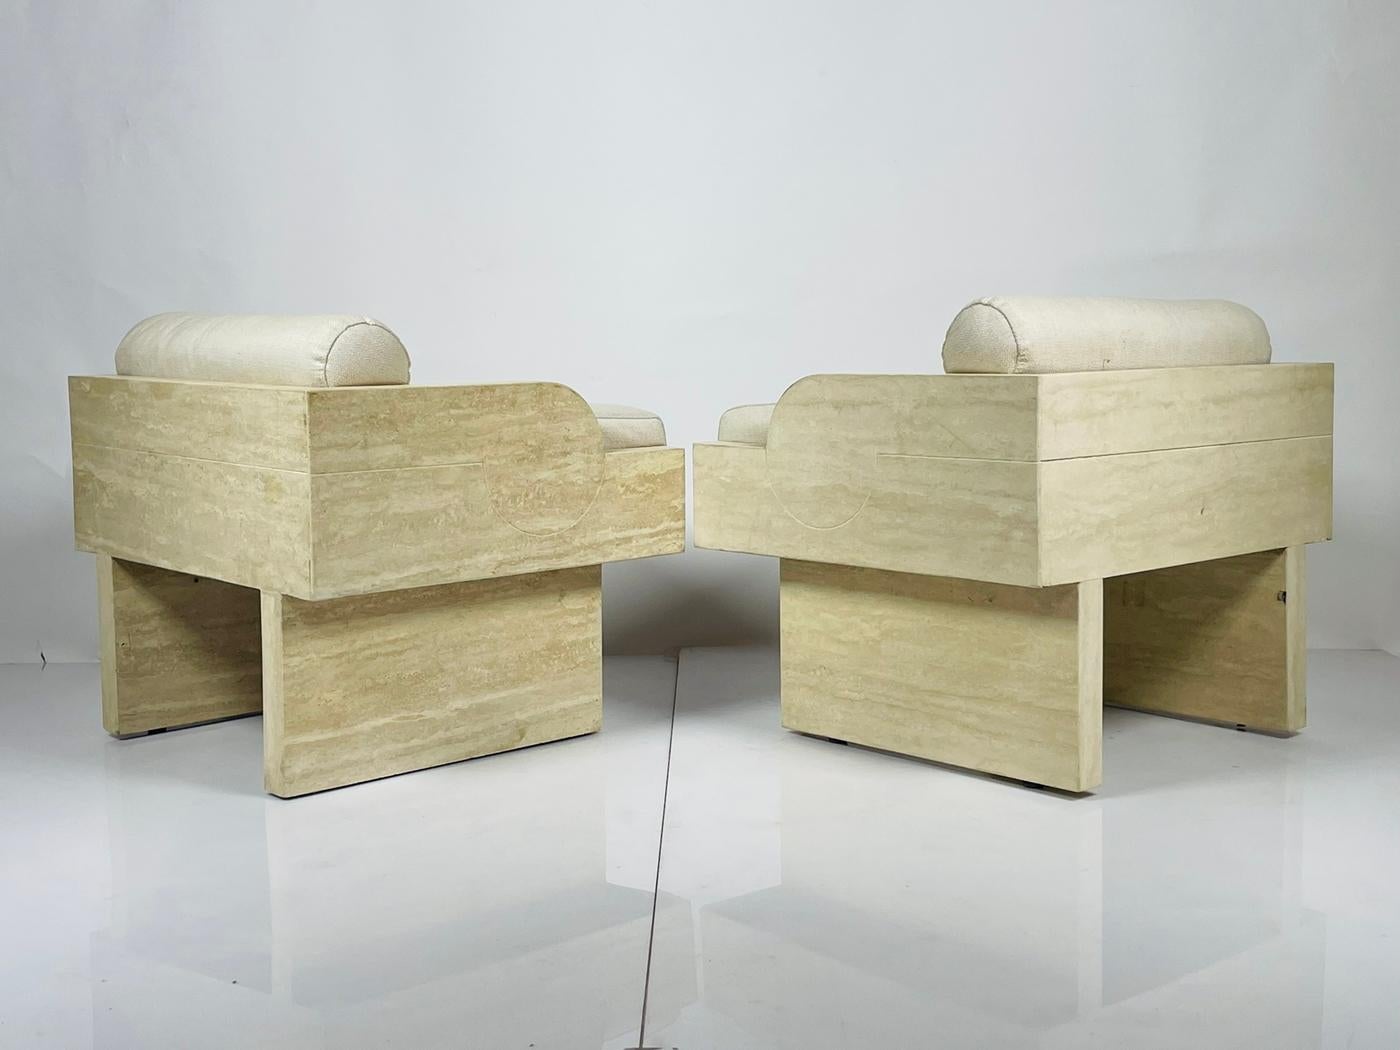 Pair of Travertine Arm Chairs Attb to Stéphane Parmentier In Good Condition For Sale In Los Angeles, CA